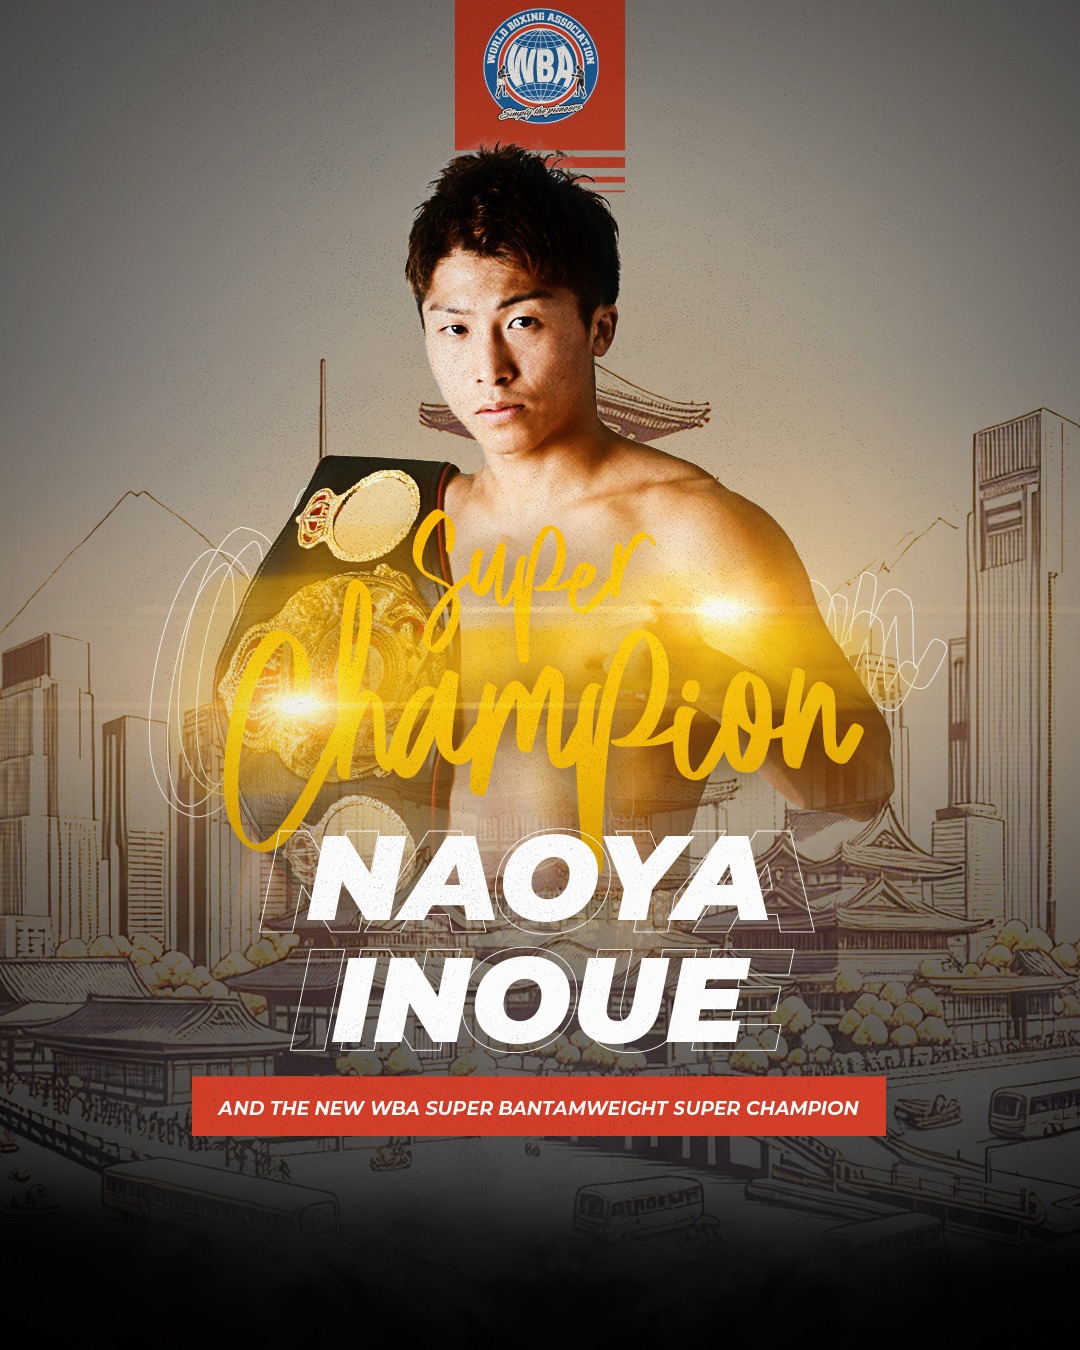 Inoue demolishes Tapales to become undisputed champion 